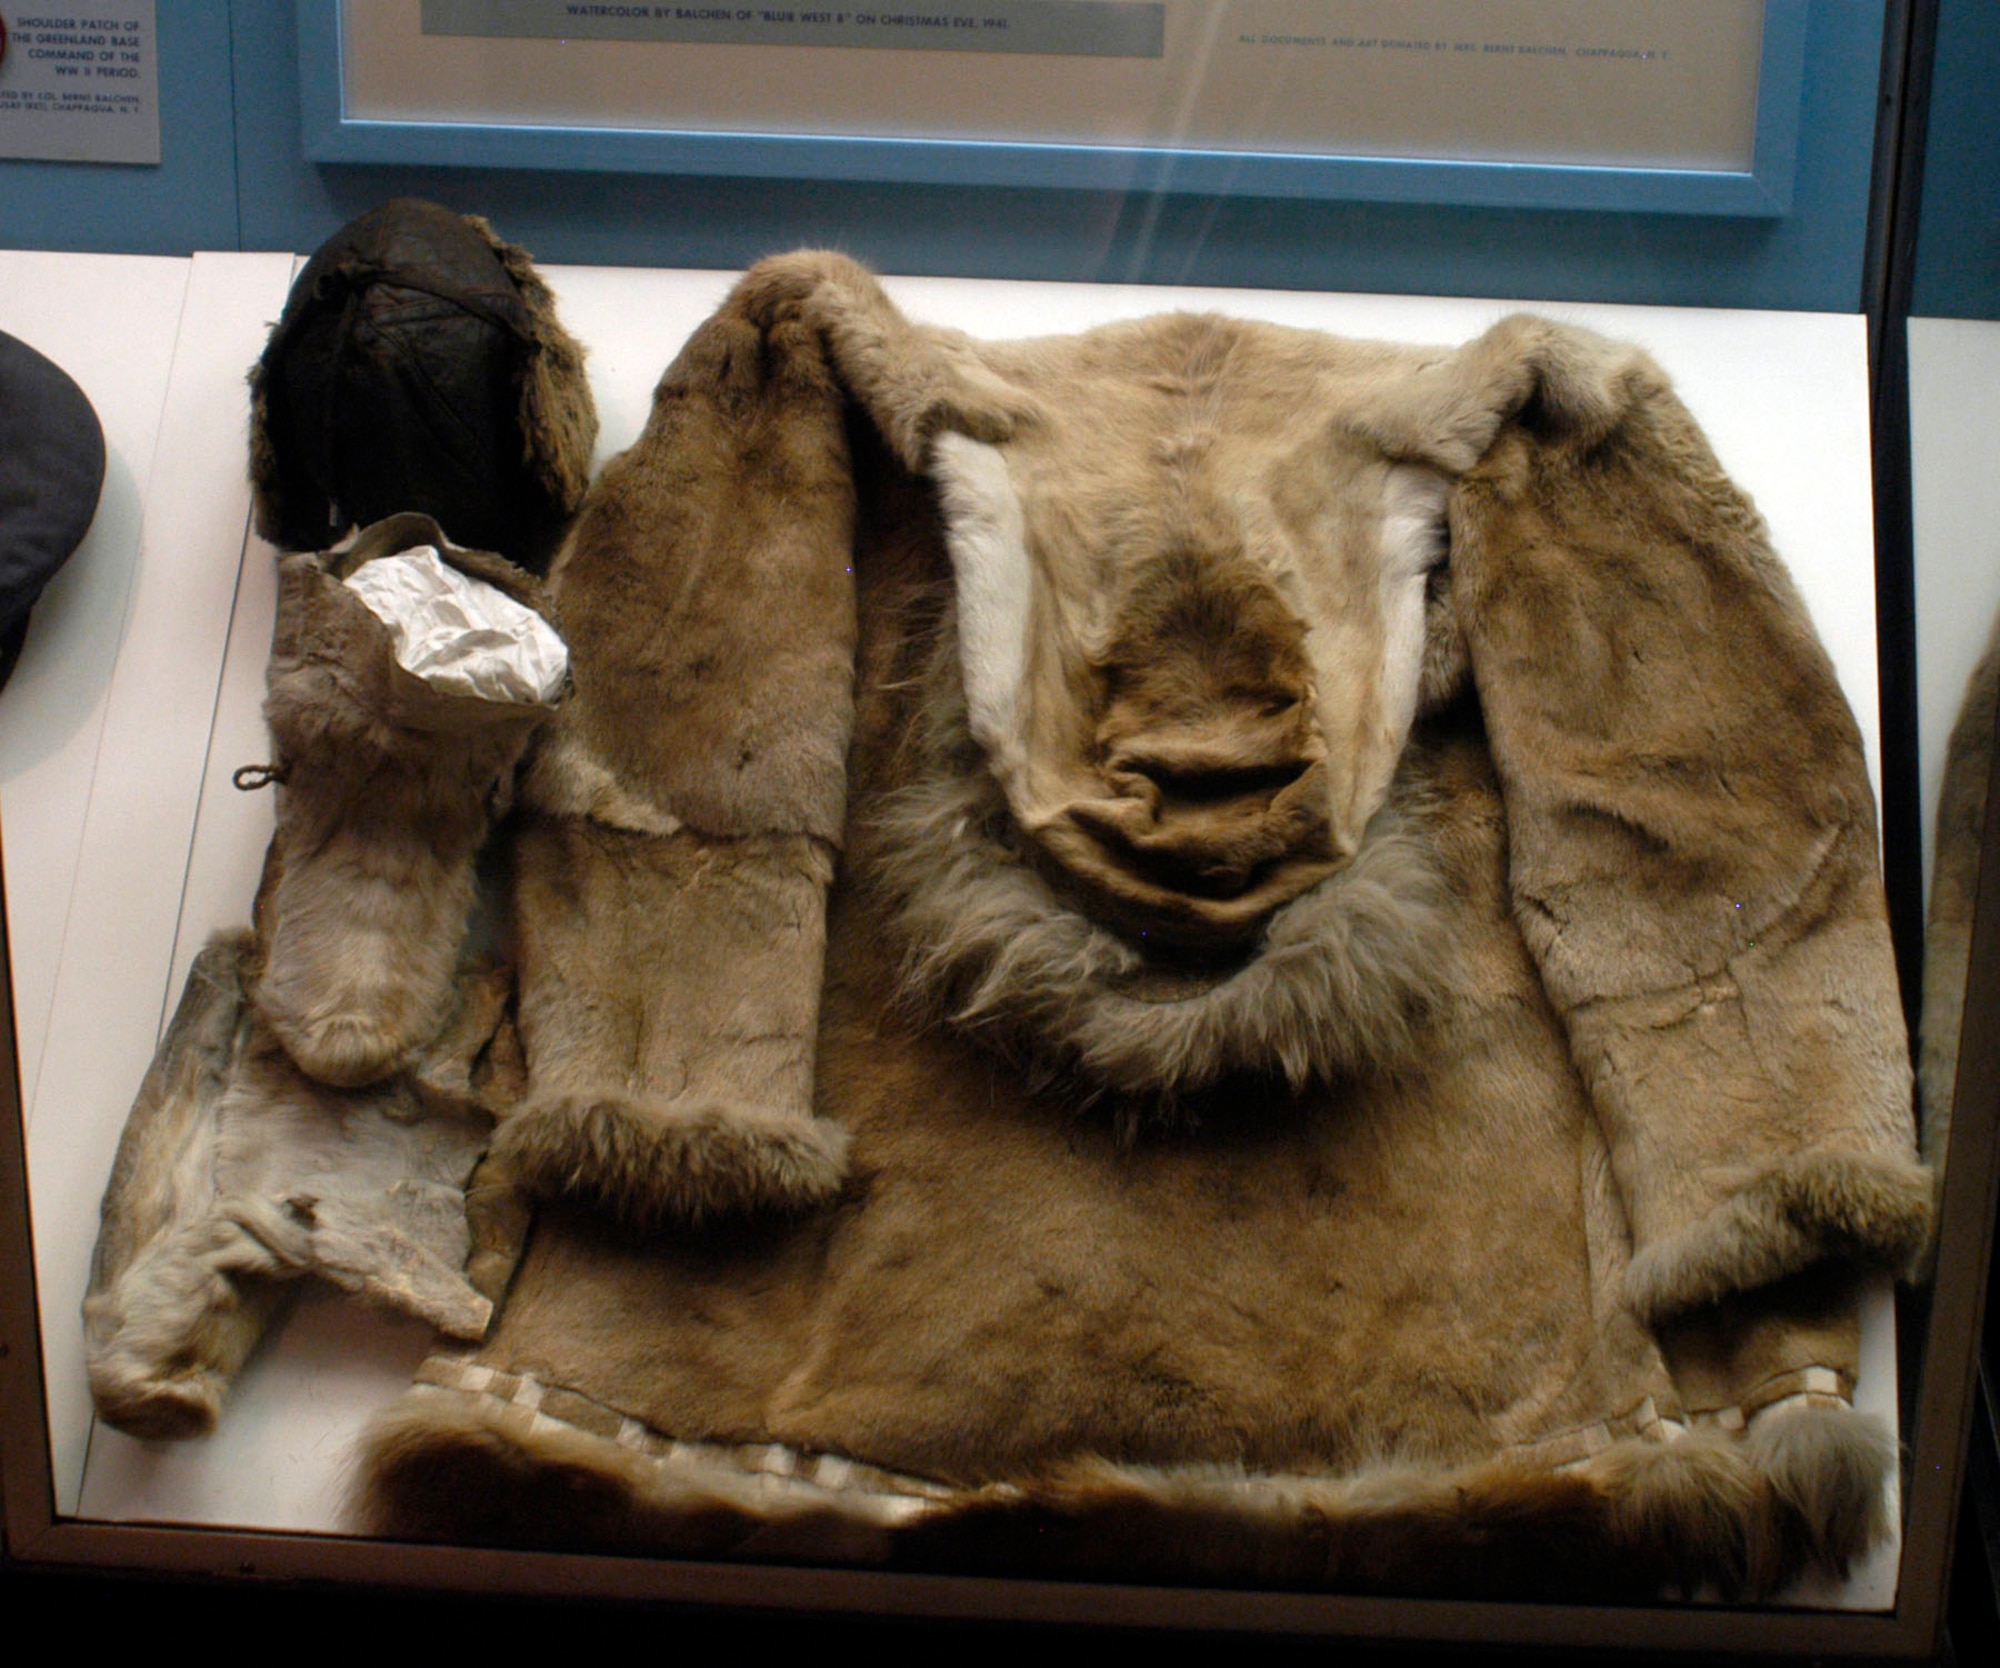 DAYTON, Ohio -- This cold weather clothing worn in the Arctic by Col. Bernt Balchen is on display in the World War II Gallery of the National Museum of the U.S. Air Force. Donated by Col. (Ret.) Bernt Balchen of Chippaqua, N.Y. (U.S. Air Force photo)